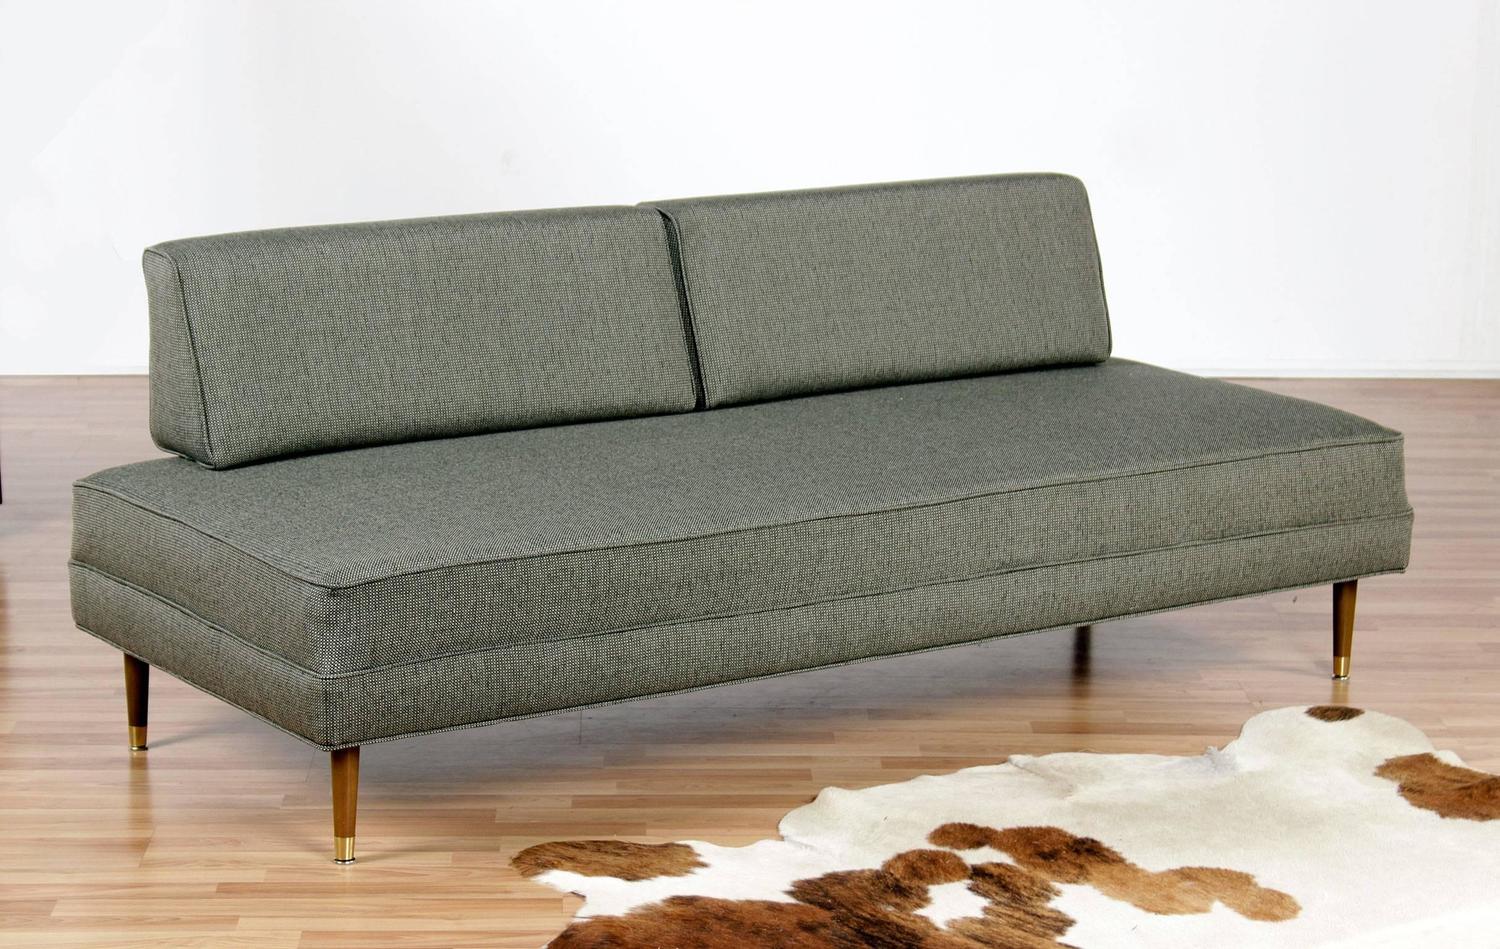 Restored Mid-Century Modern Daybed Sofa For Sale at 1stdibs